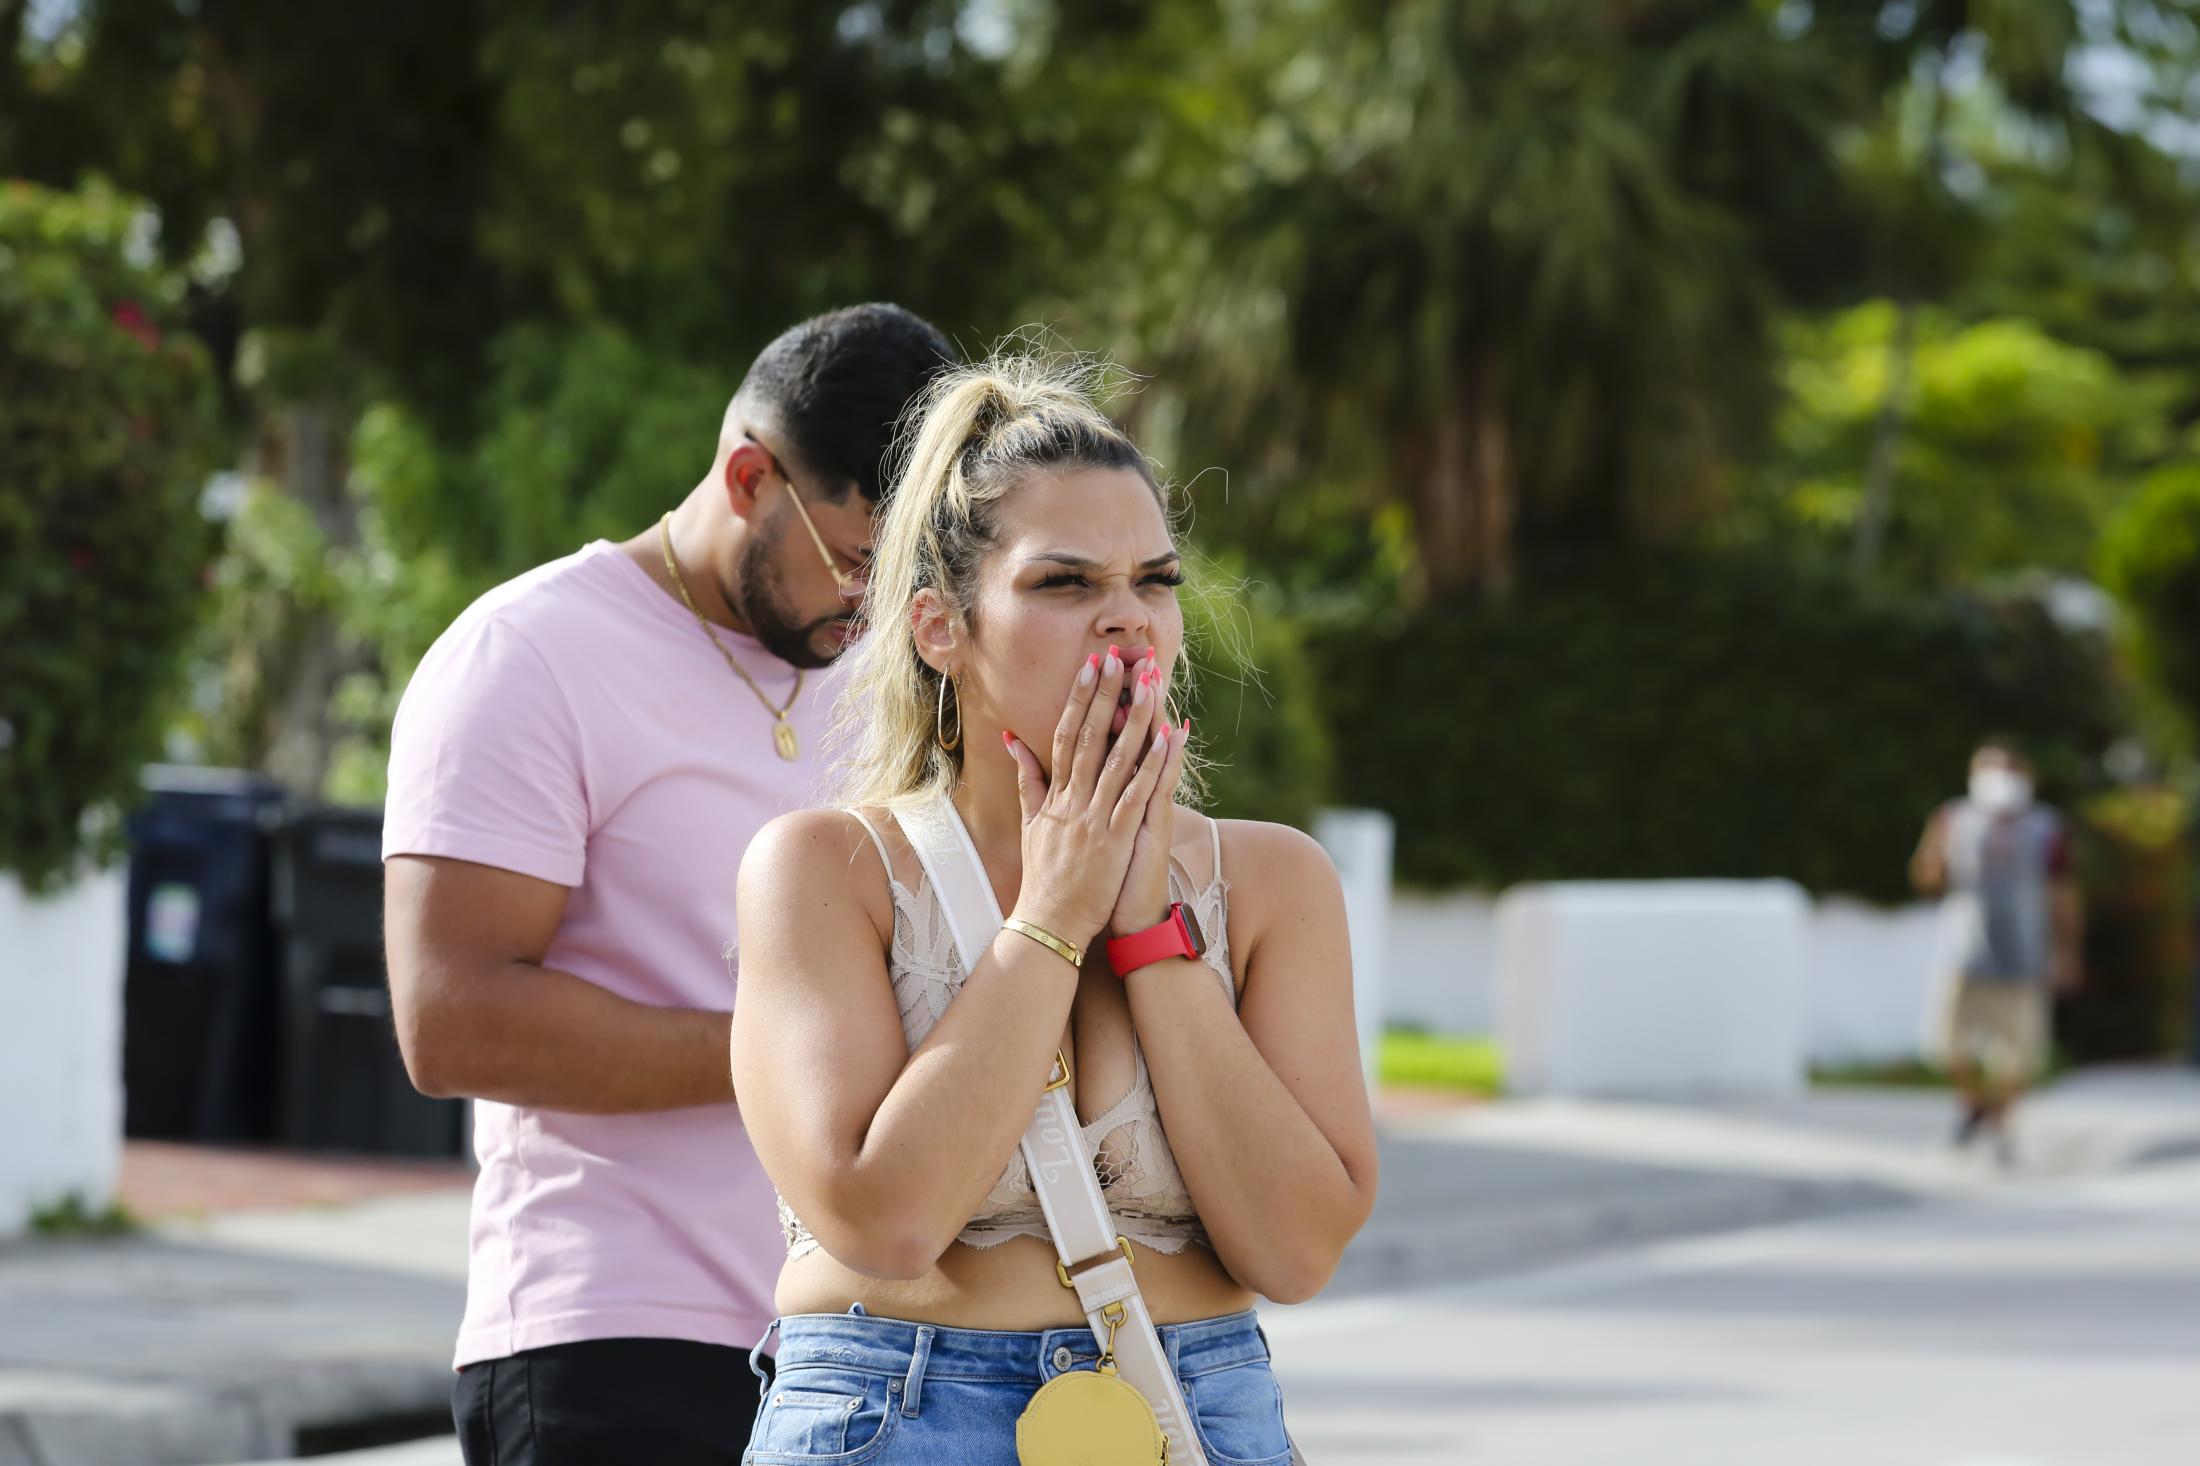 2021 - Surfside building collapsed - A woman reacts as she sees a partially collapsed building...